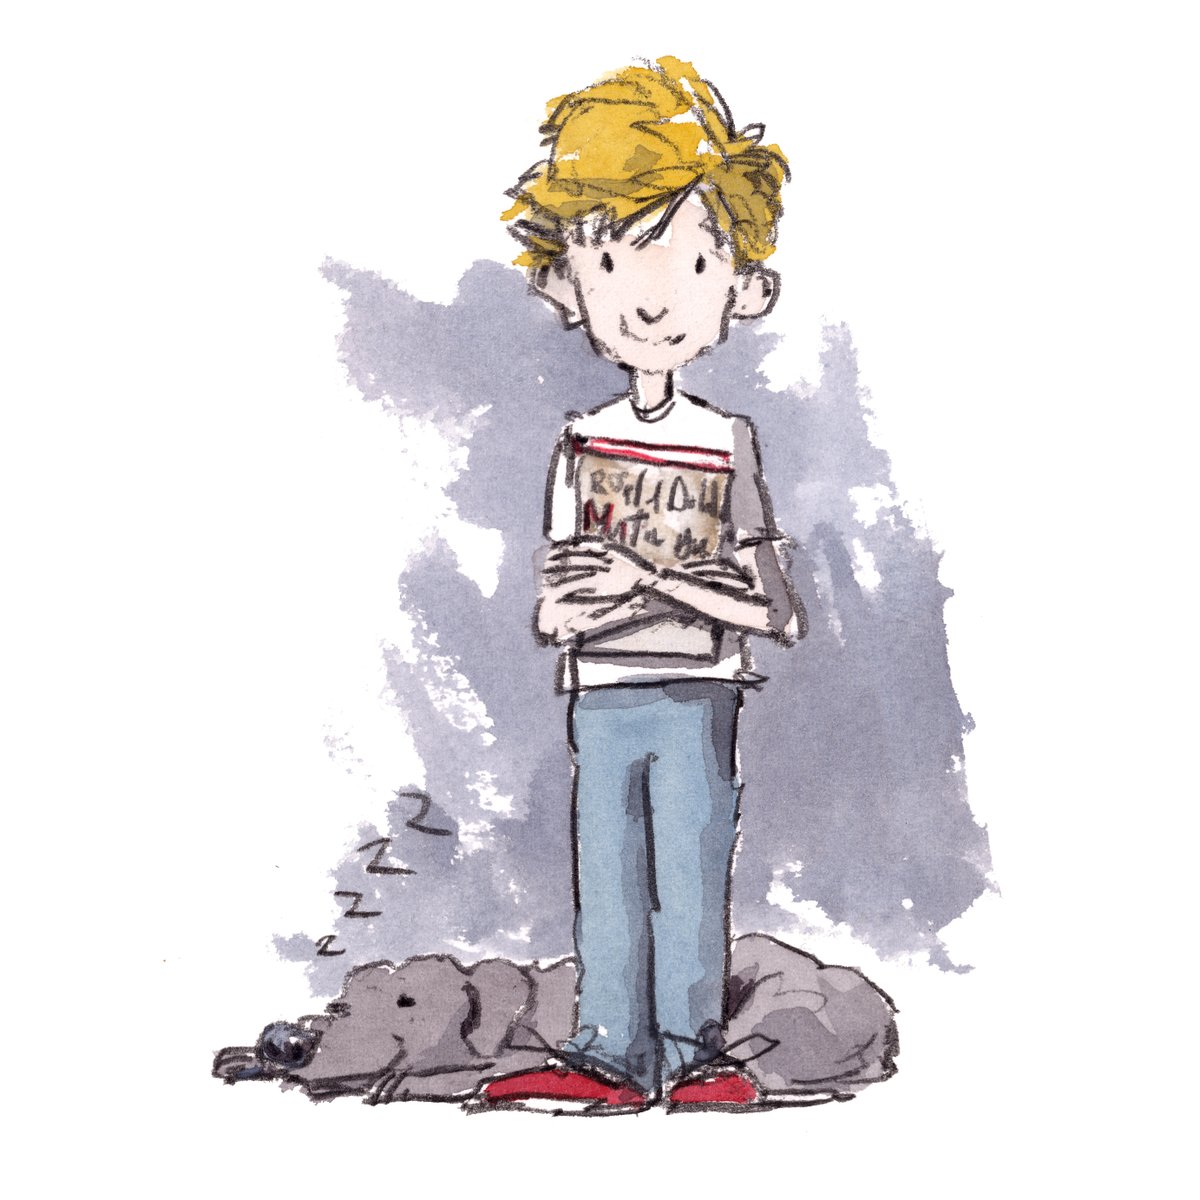 Happy #RoaldDahlStoryDay everyone. 
Can you remember when you first read your favourite Dahl book? I distinctly remember reading Matilda for the first time and loving her adventure. Also, George and his Marvellous Medicine, such a great story!! 
#RoaldDahlDay #reading #ilovebooks